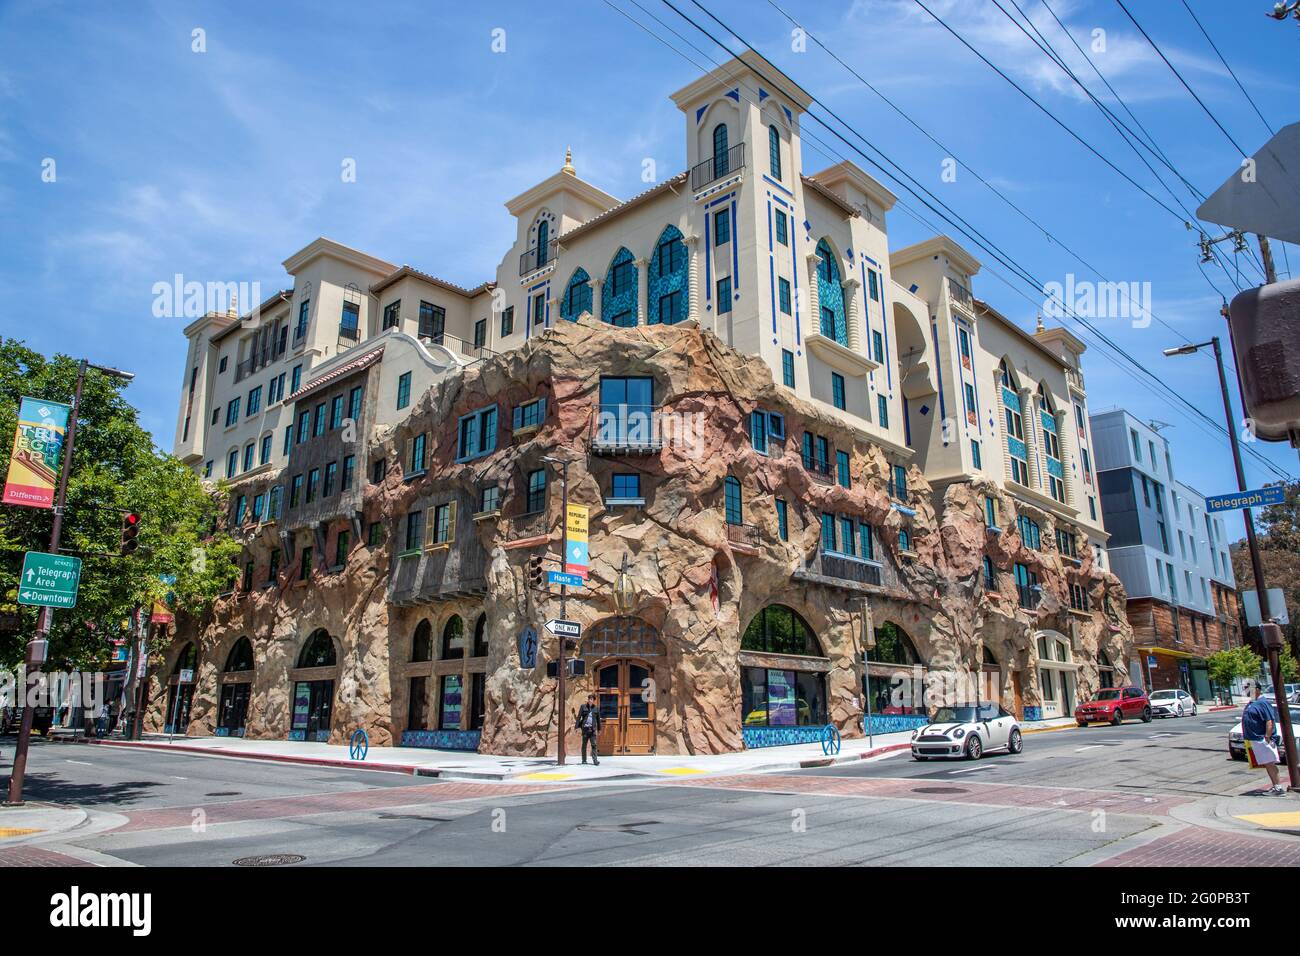 The Enclave, one of the newest student apartment buildings in Berkeley, California, that sits on the corner of Telegraph and Haste. Stock Photo